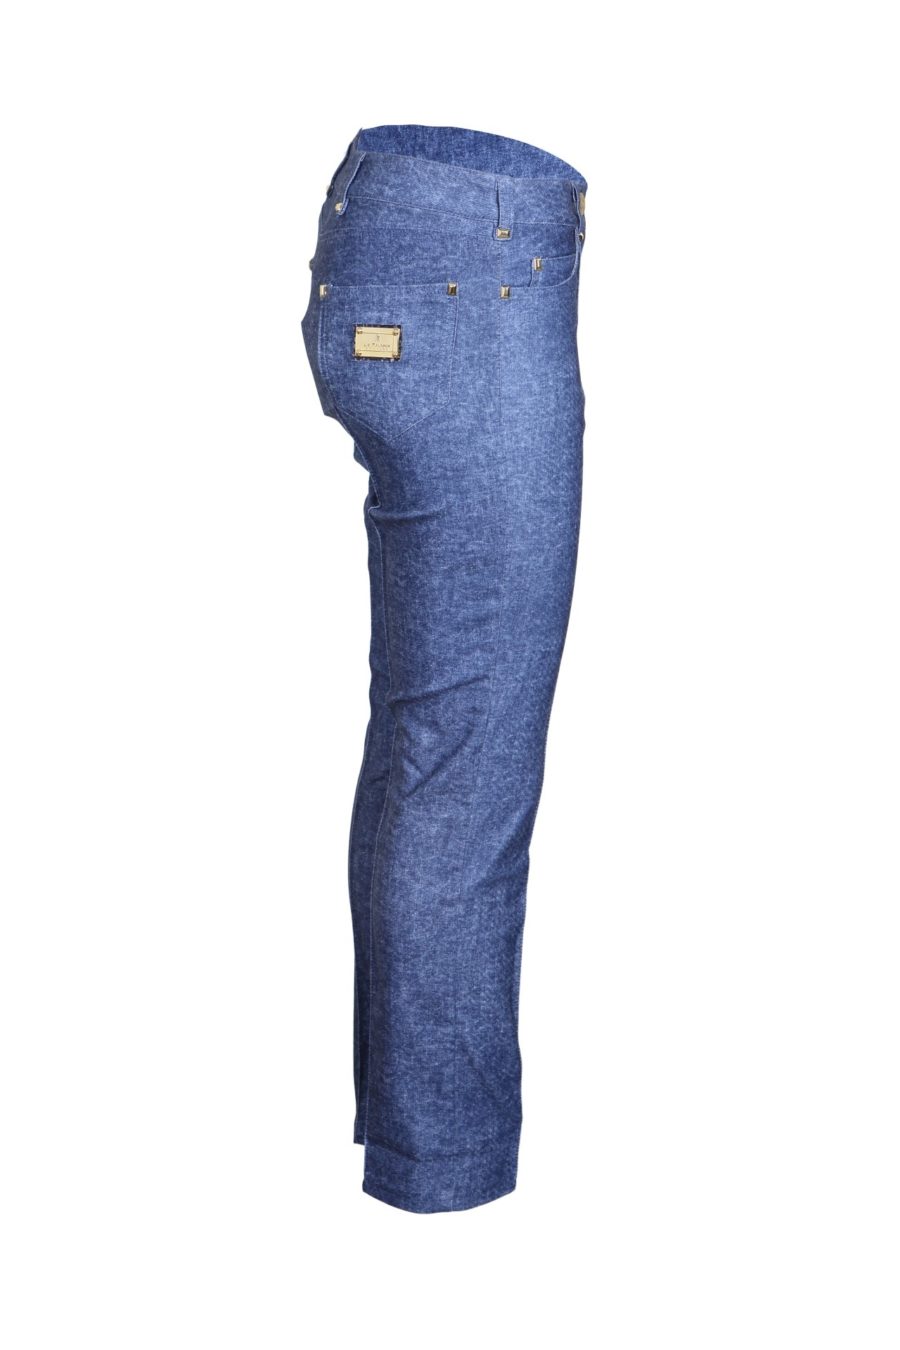 Jersey jeans, with gold studs in diamond style, denim look